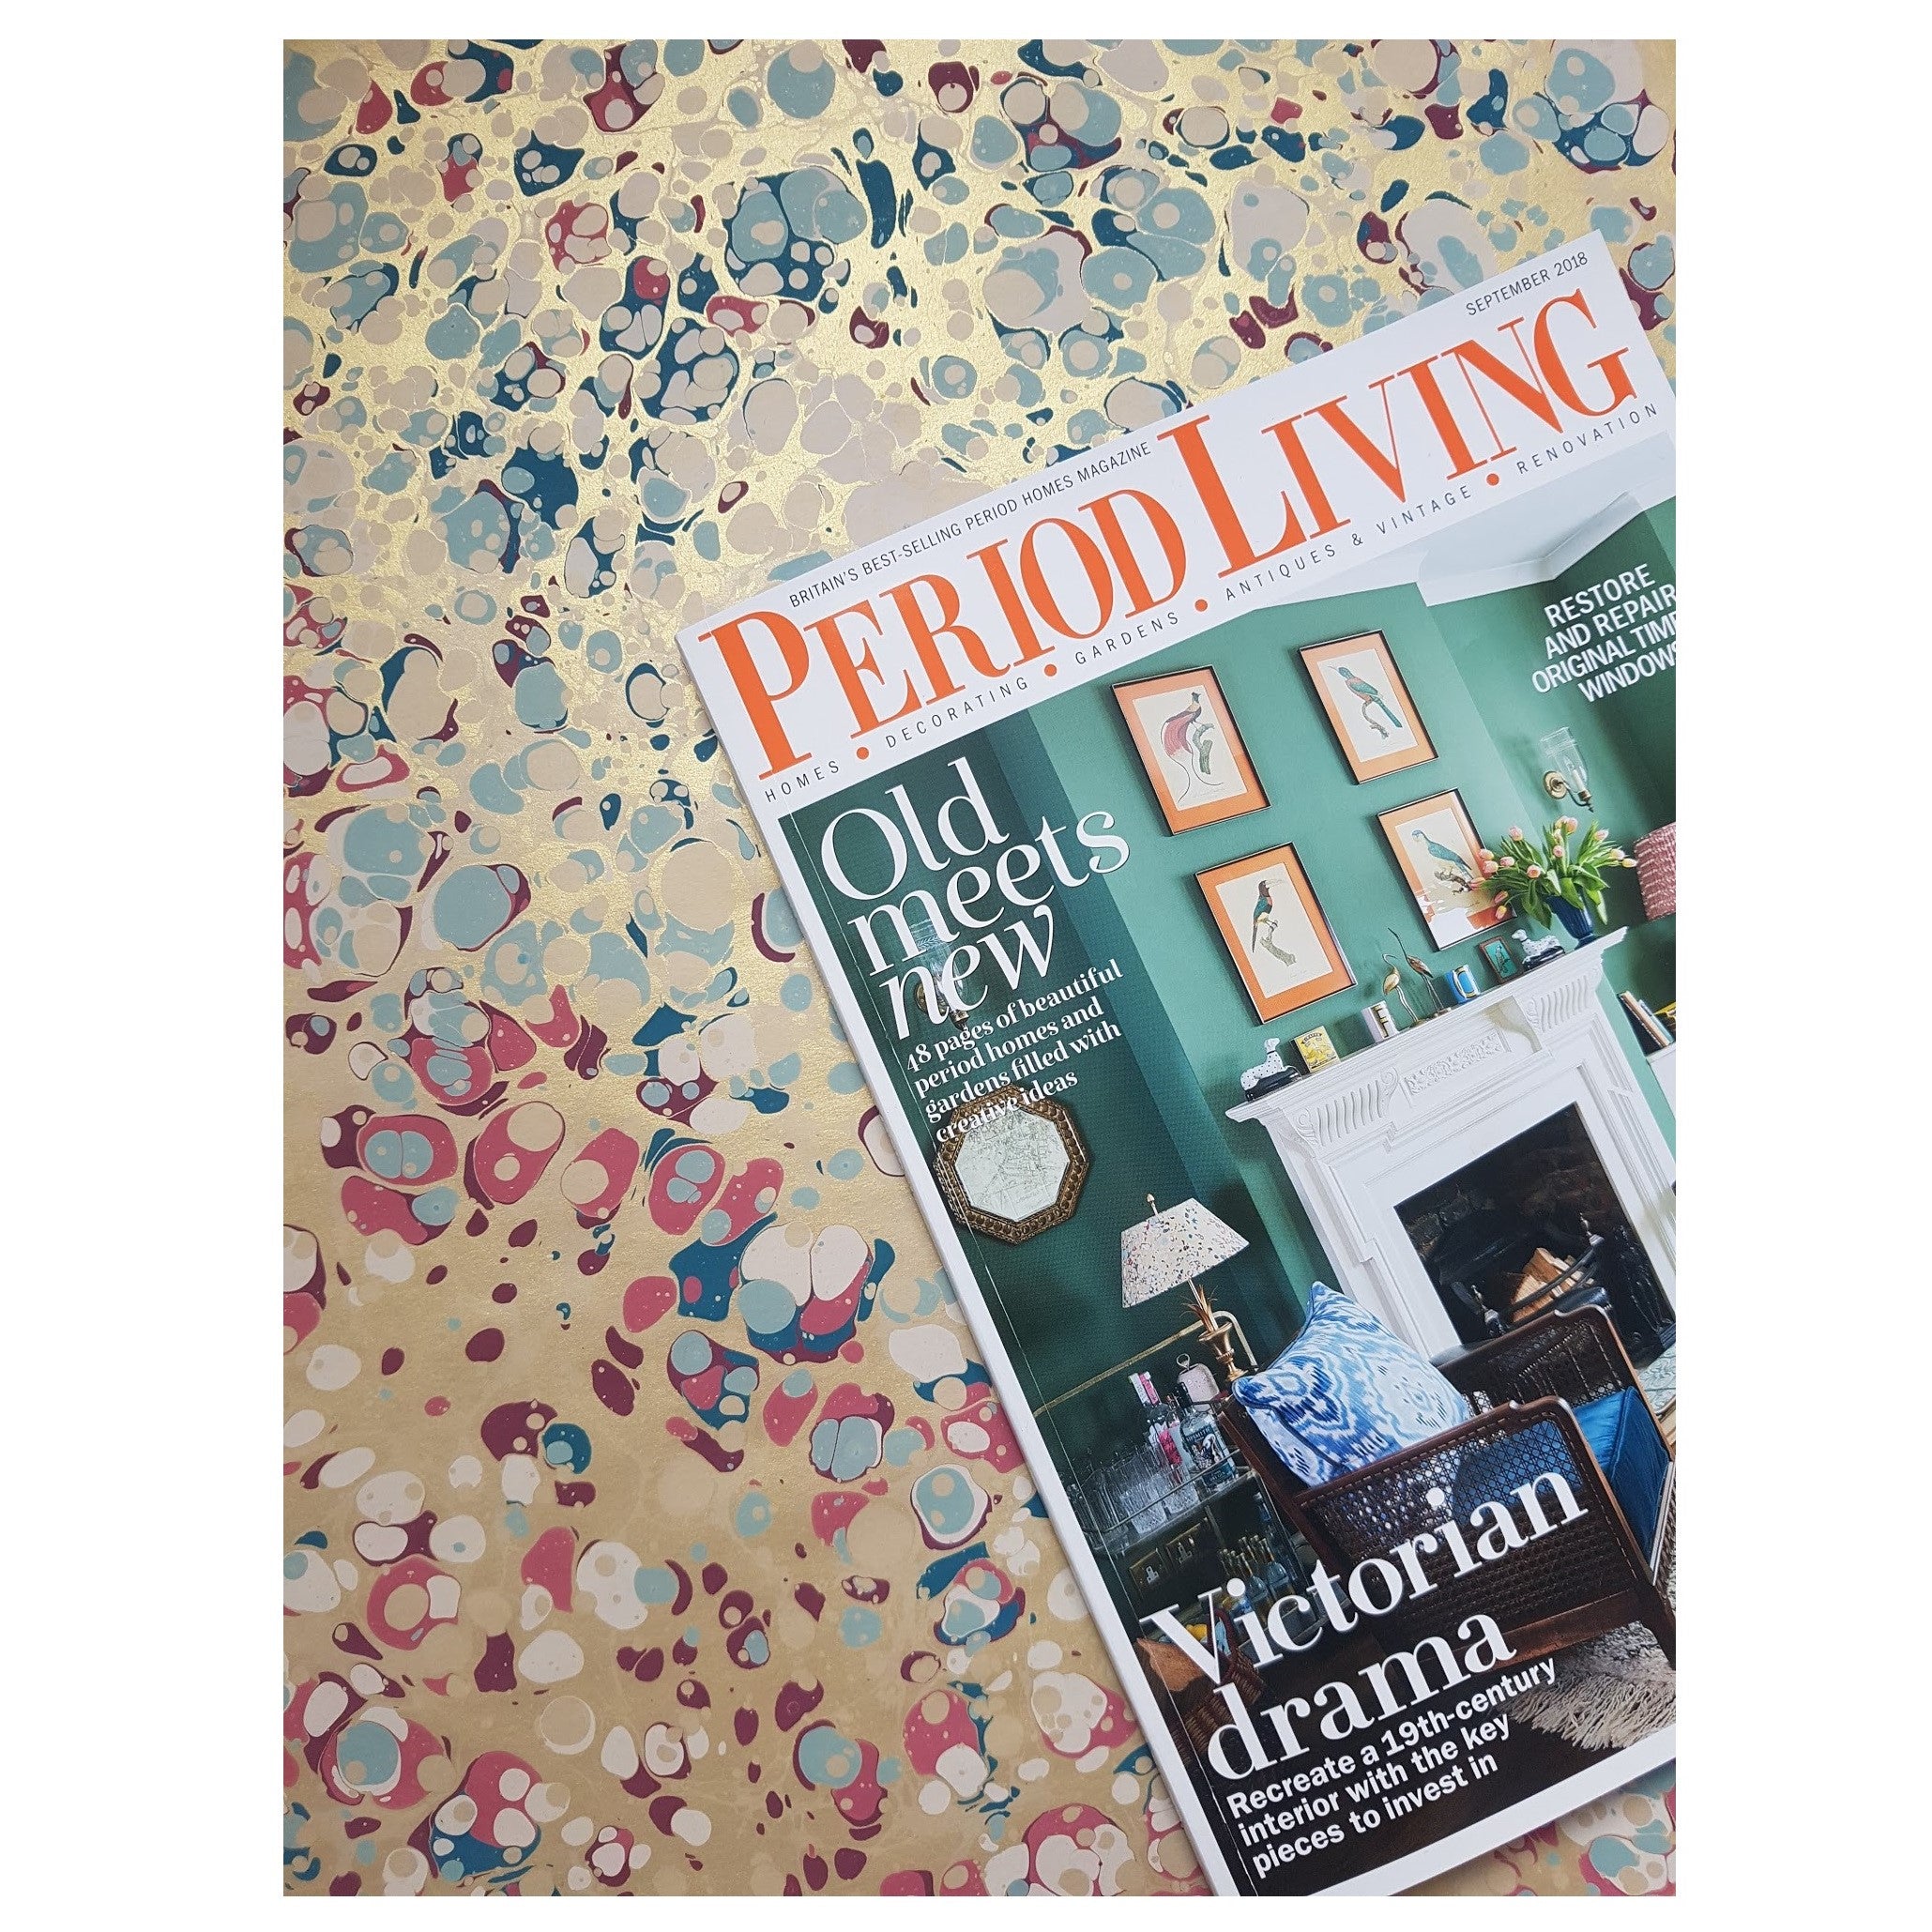 Munro and Kerr metallic marbled lampshade in Rococo London Interiors Period Living magazine